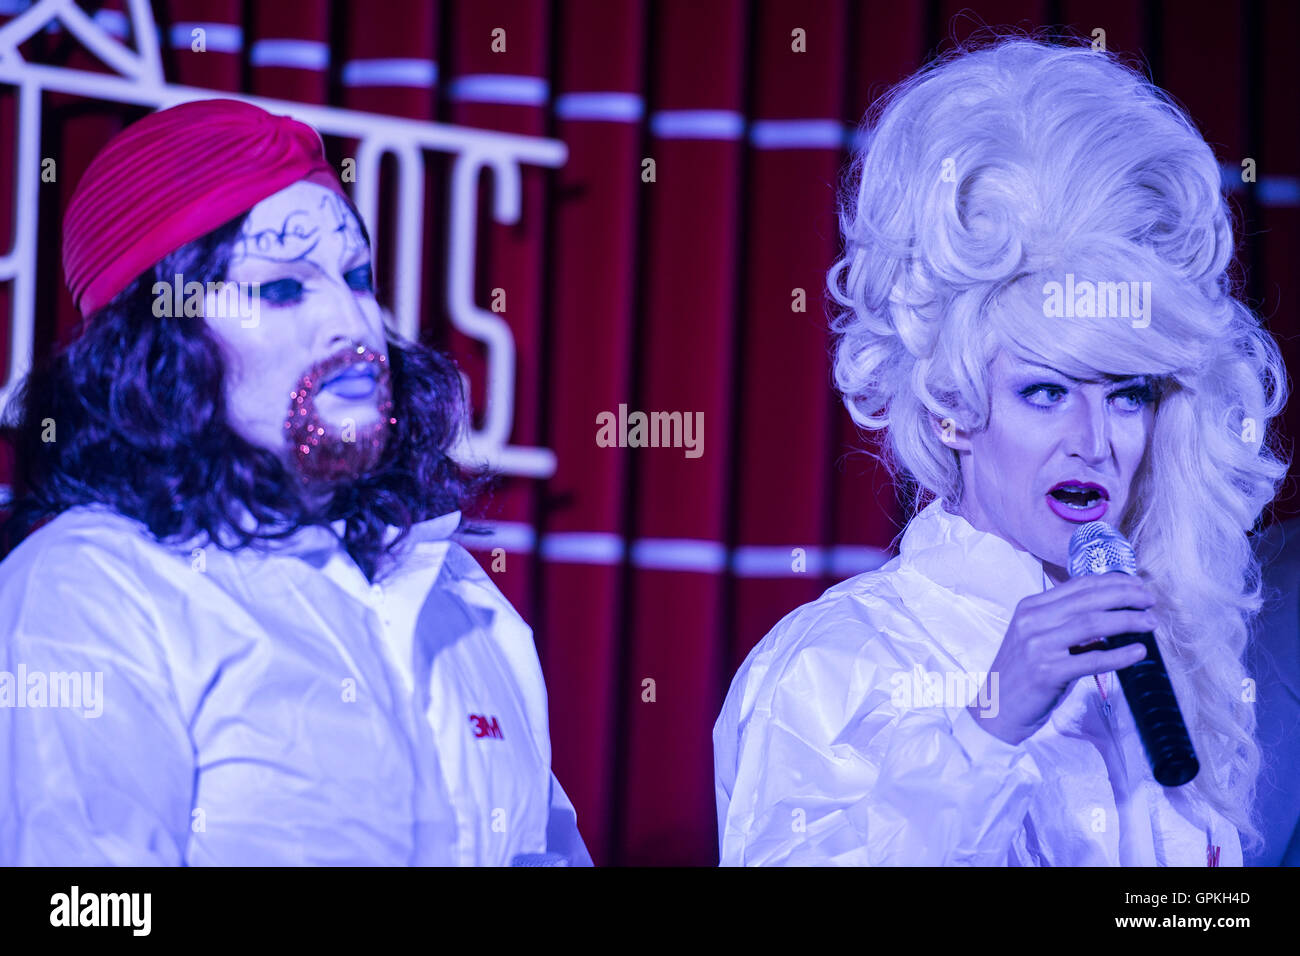 London, UK. 4th September, 2016. Denim perform on the opening weekend of revamped live entertainment venue - The Crazy Coqs, Live at Zedel - Denim,Glamrou La Denim, Crystal Vaginova, Electra Cute, Shirley Du Naughty & Aphrodite Jones, are a Cambridge founded musical comedy drag troope who last summer performed with Florence and The Machine at Glastonbury. Credit:  Guy Bell/Alamy Live News Stock Photo